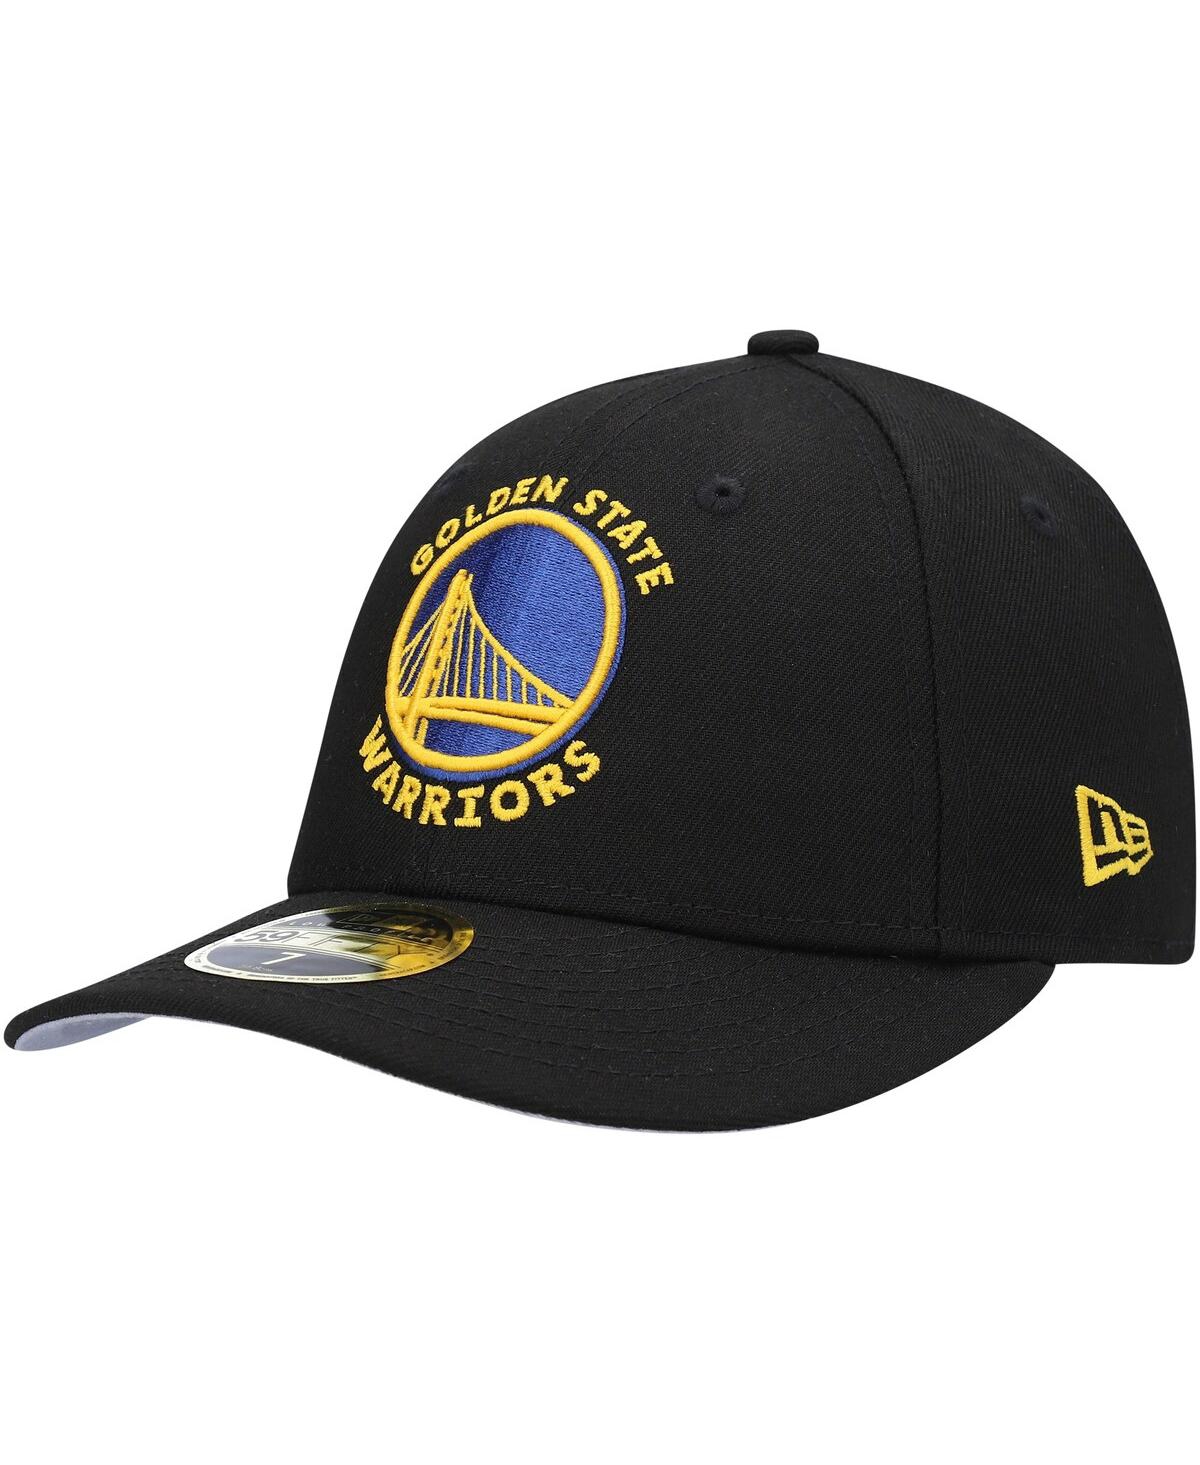 Men's New Era Black Golden State Warriors Team Low Profile 59FIFTY Fitted Hat - Black